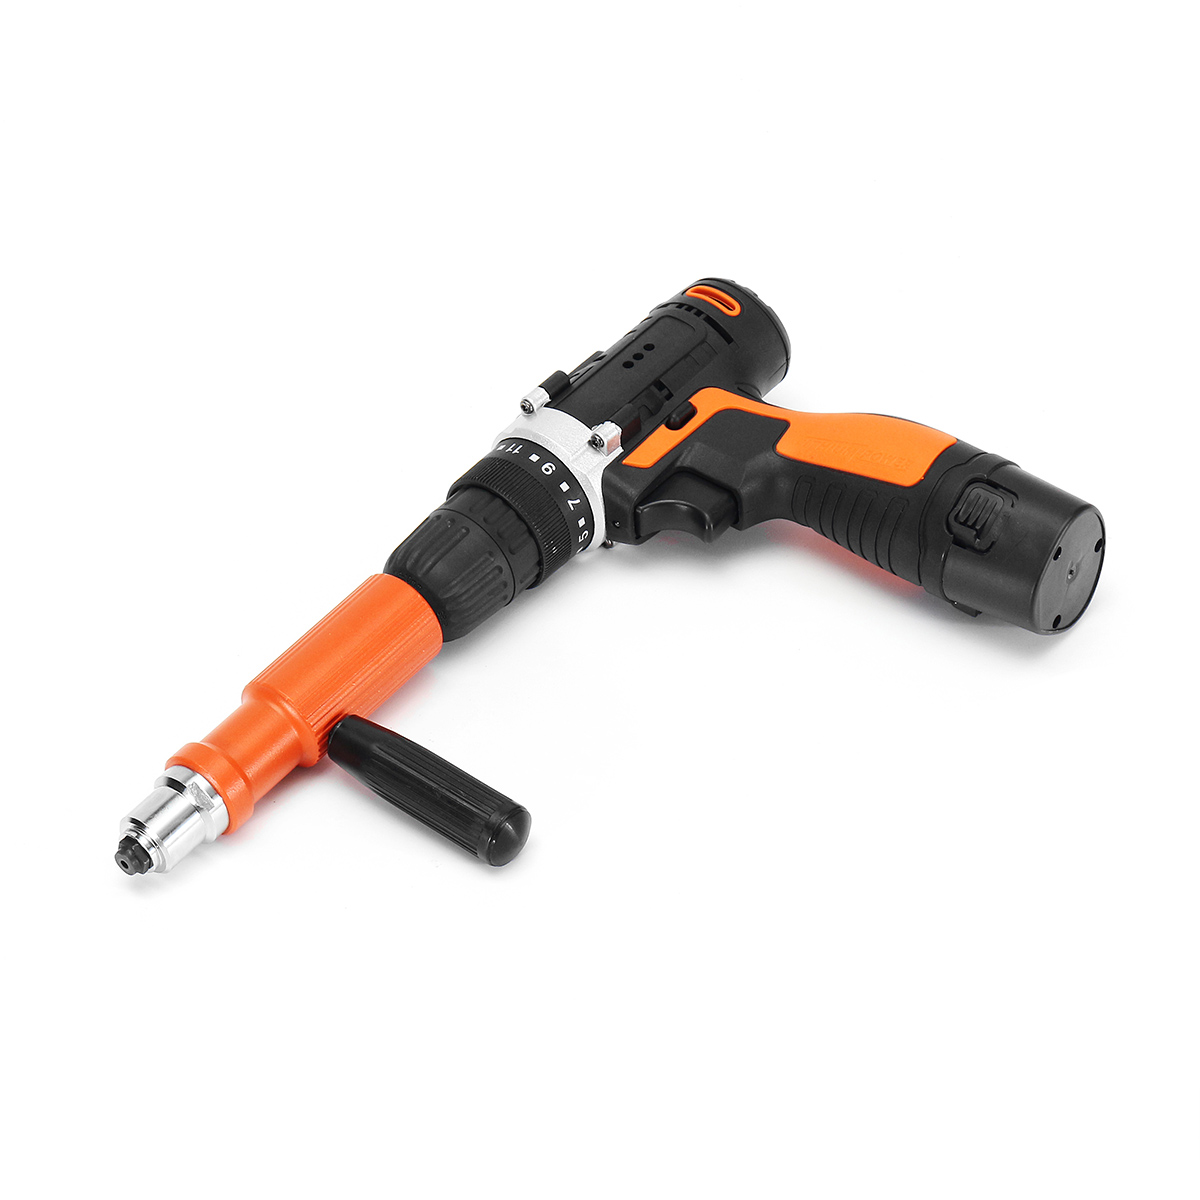 Drillpro-Upgraded-Electric-Rivet-Nut-Attachment-Cordless-Riveting-Tool-Drill-Adapter-for-Electric-Dr-1285523-3